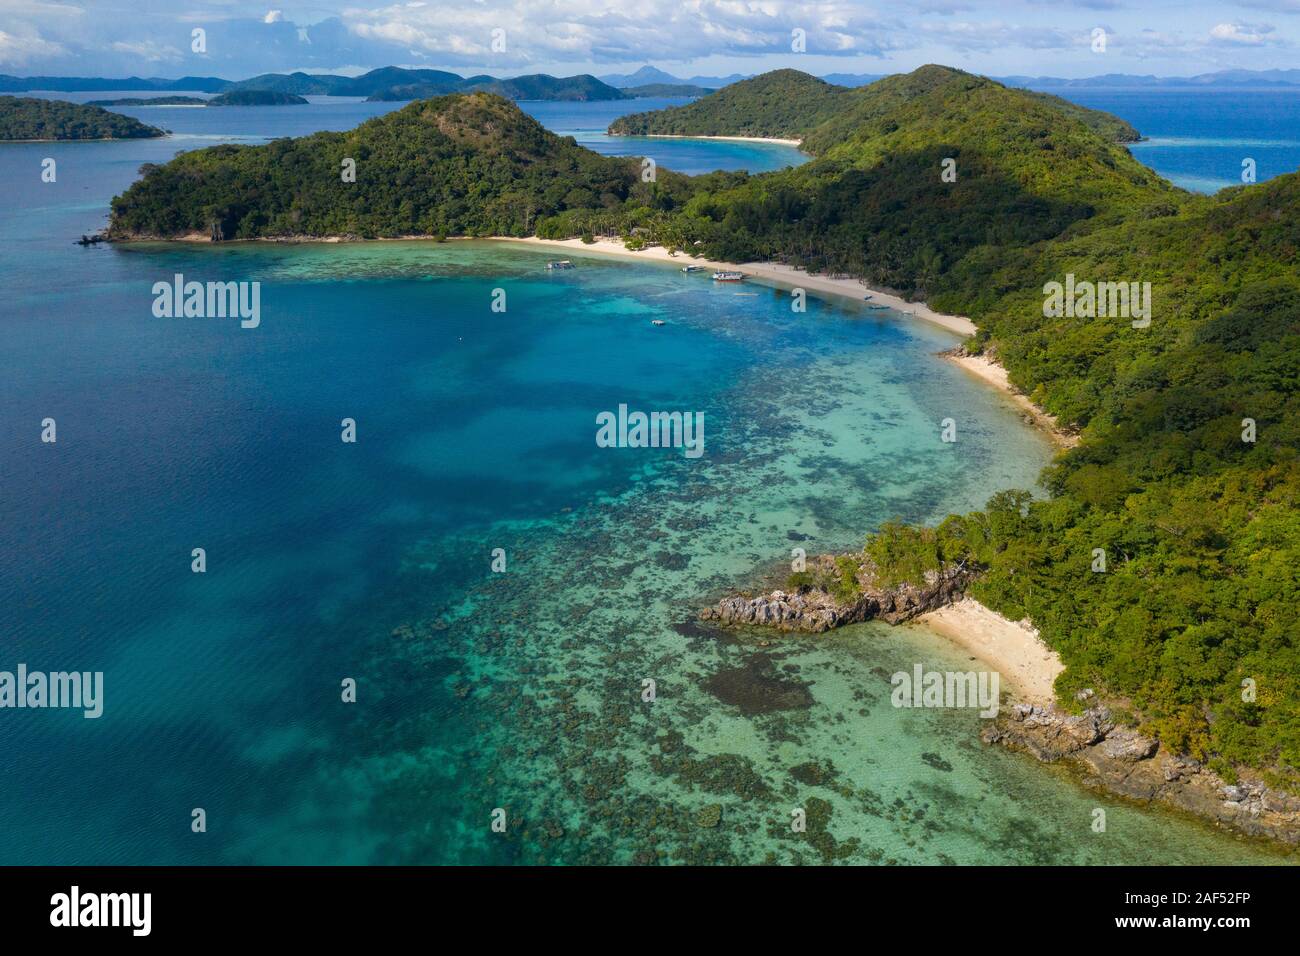 Aerial view of Island Hopping destination known as Coco Beach,Coron,Palawan,Philippines Stock Photo